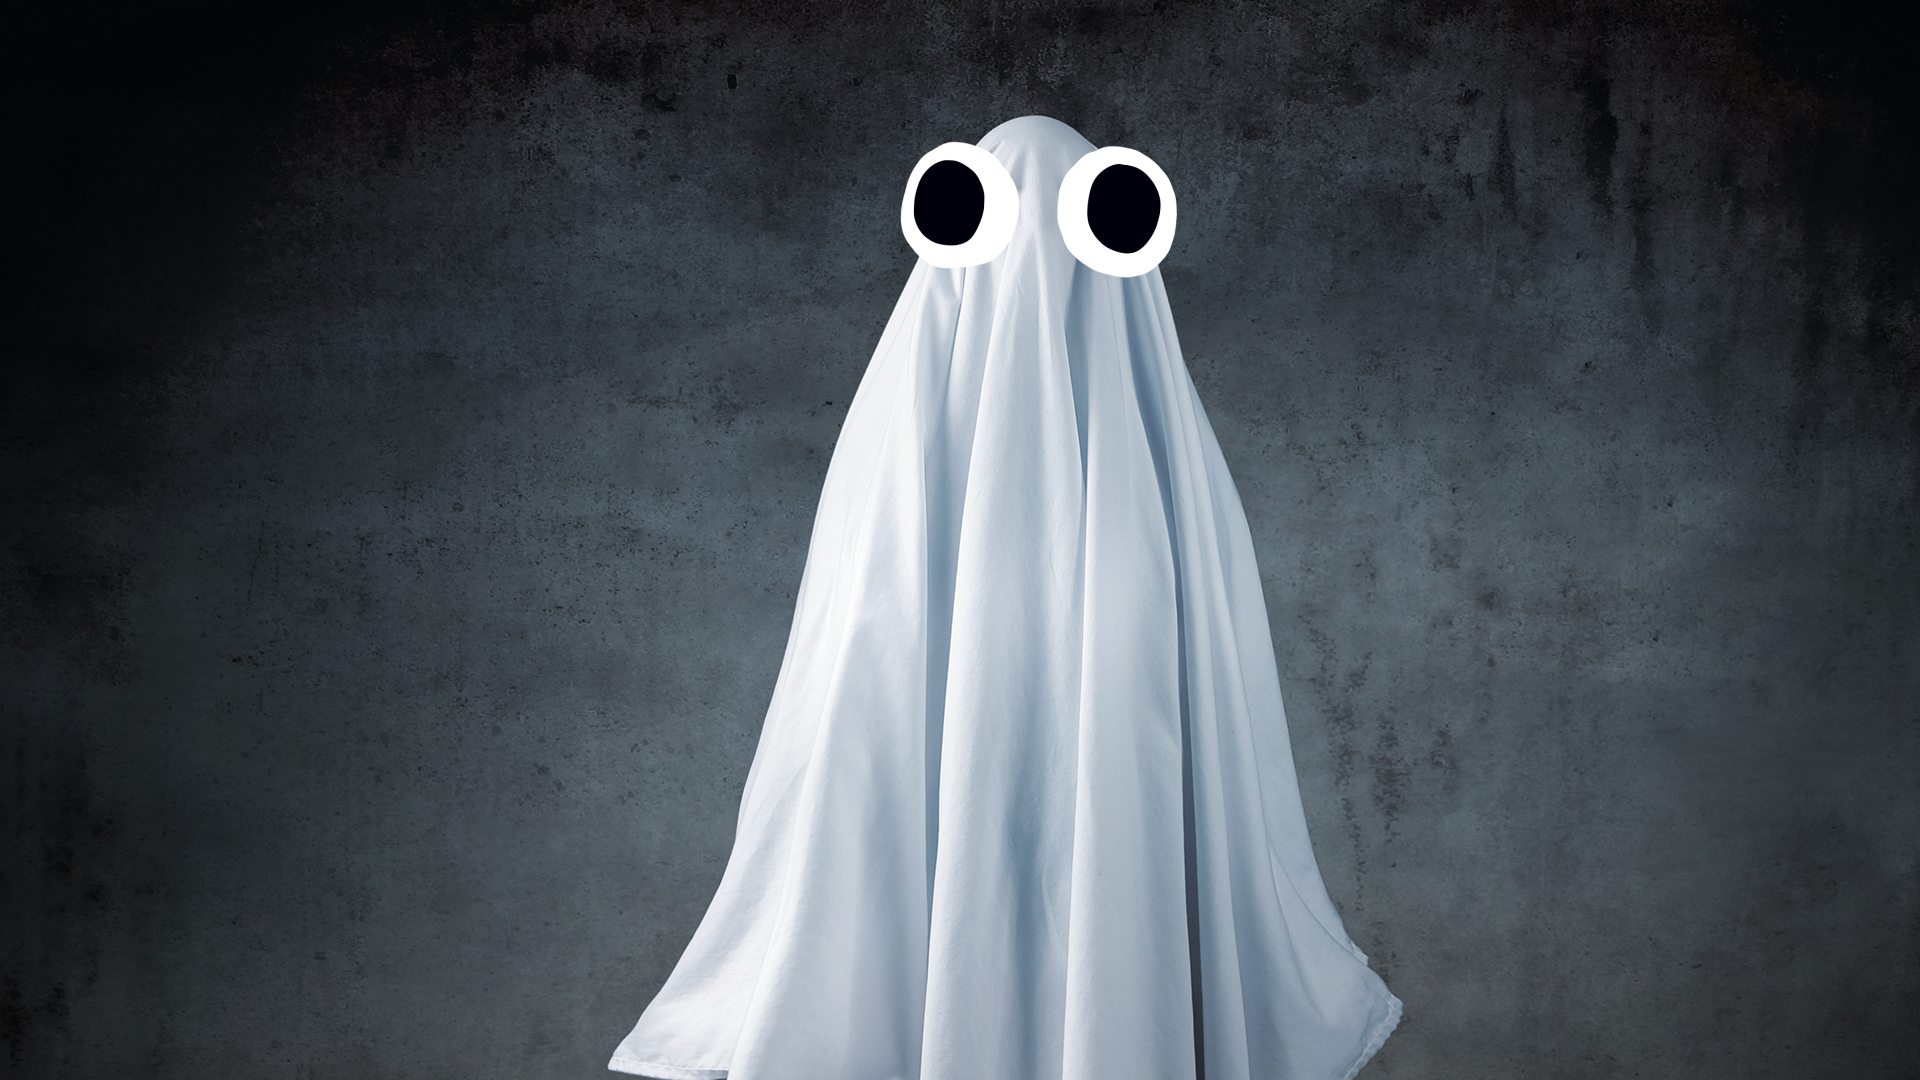 A ghost with googly eyes